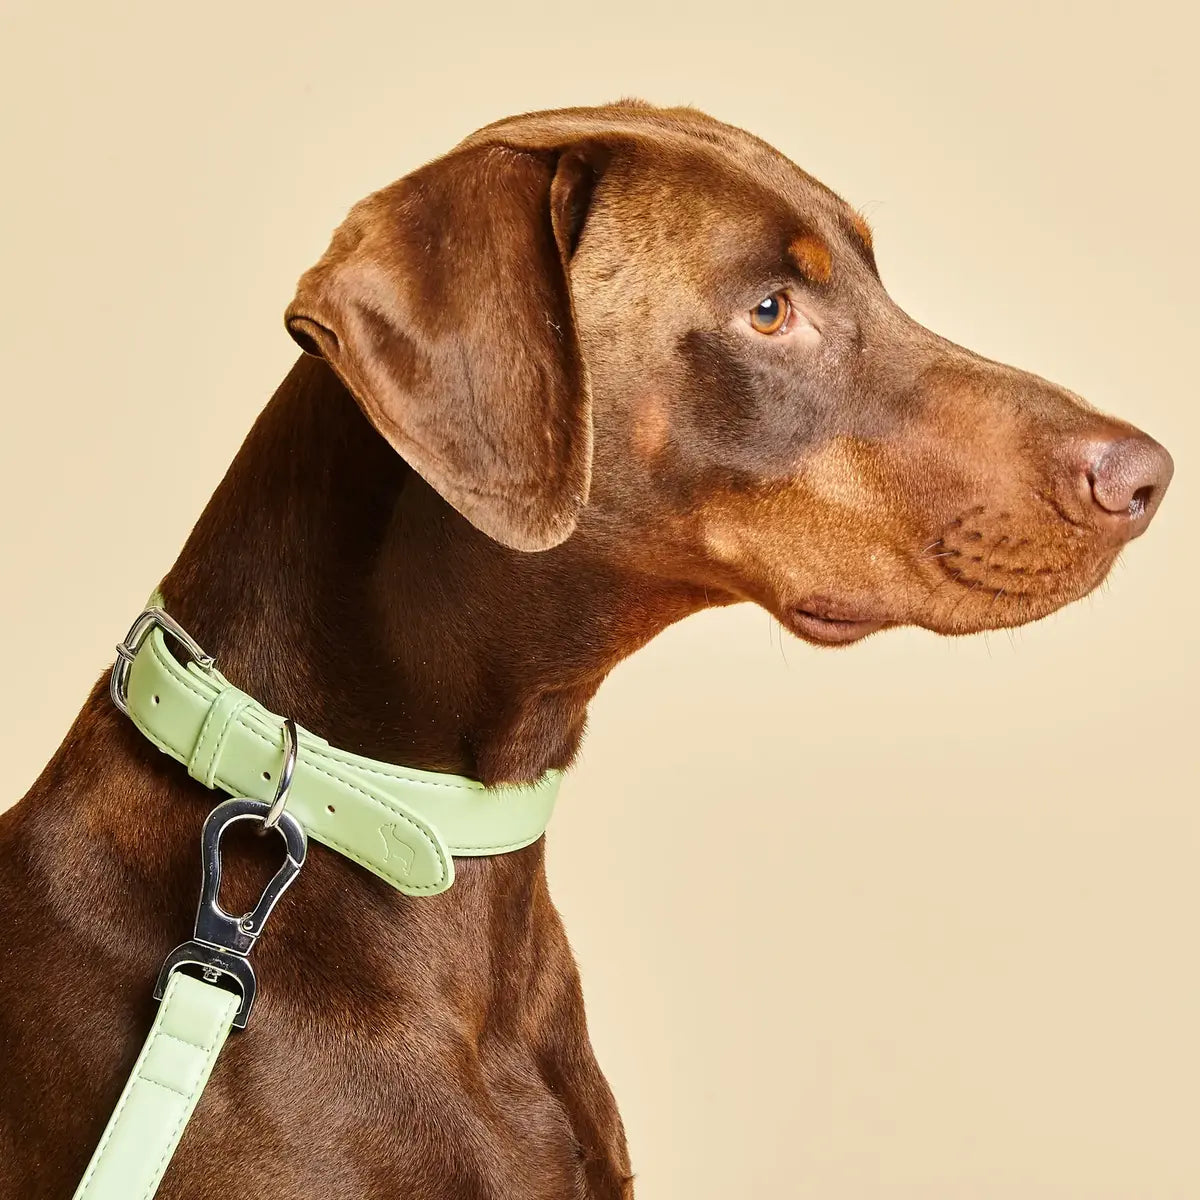 dog wearing a green collar with lead attached